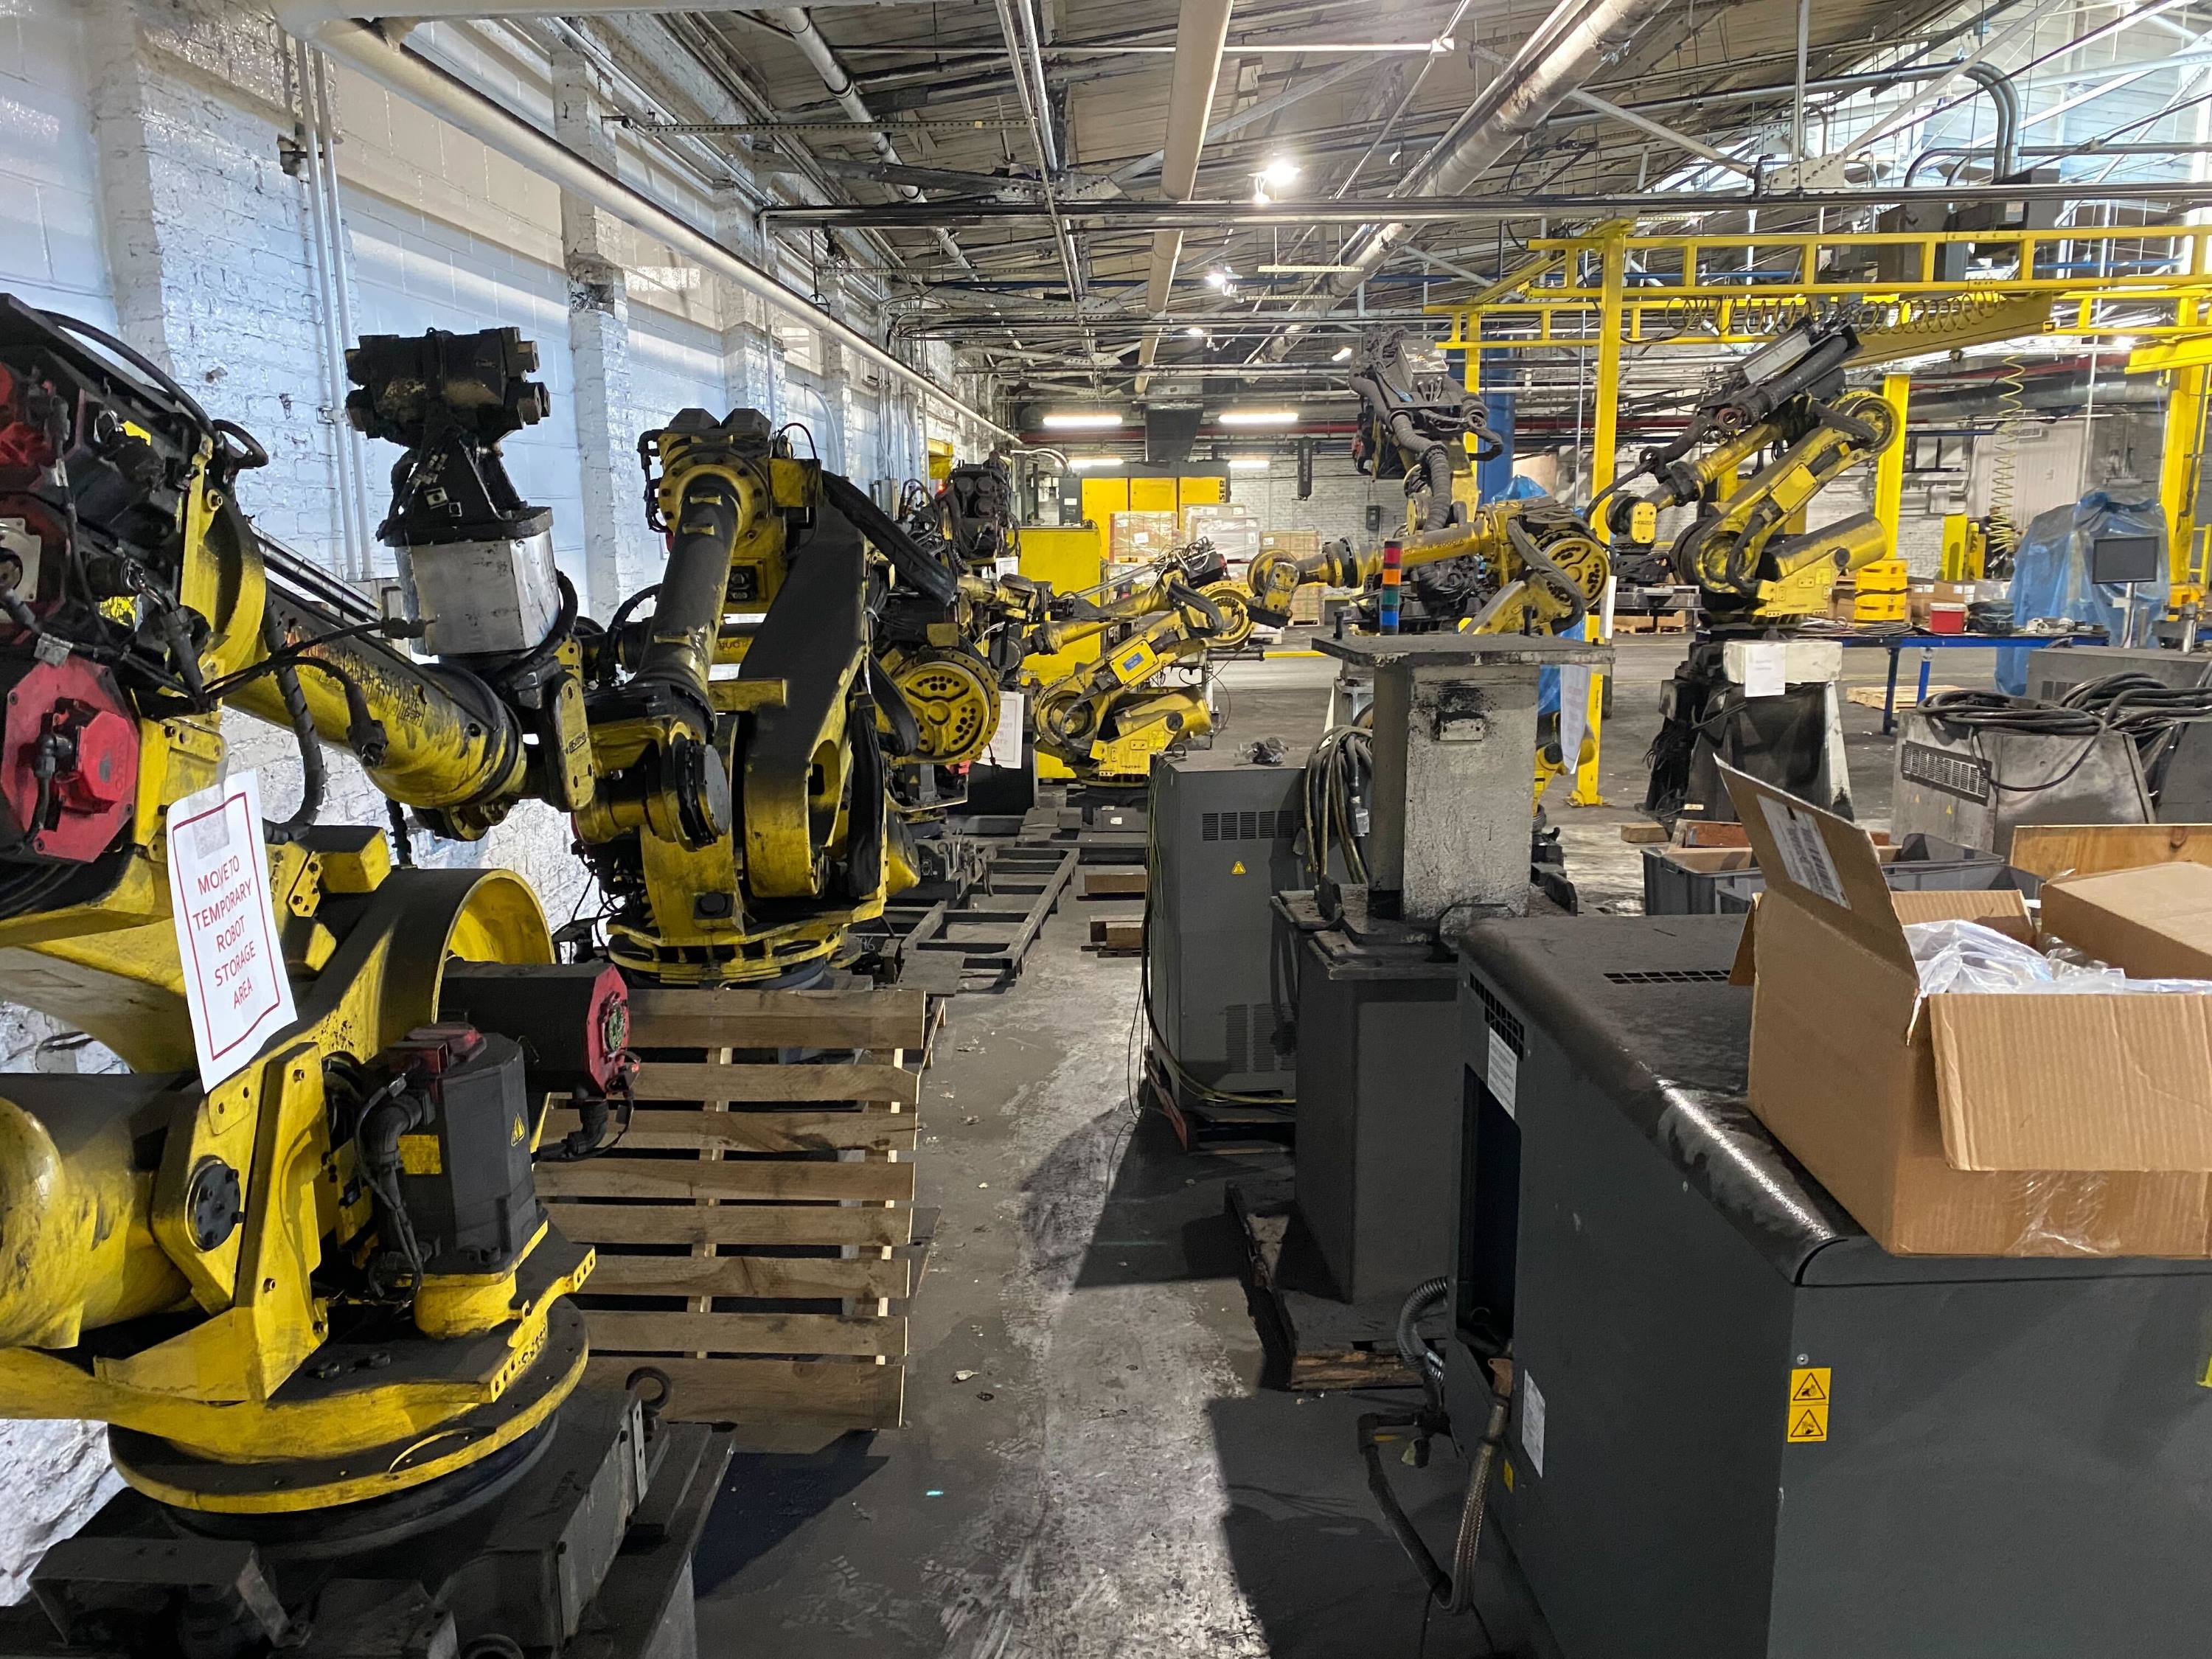 Several industrial robots sitting unused in a factory storage area.